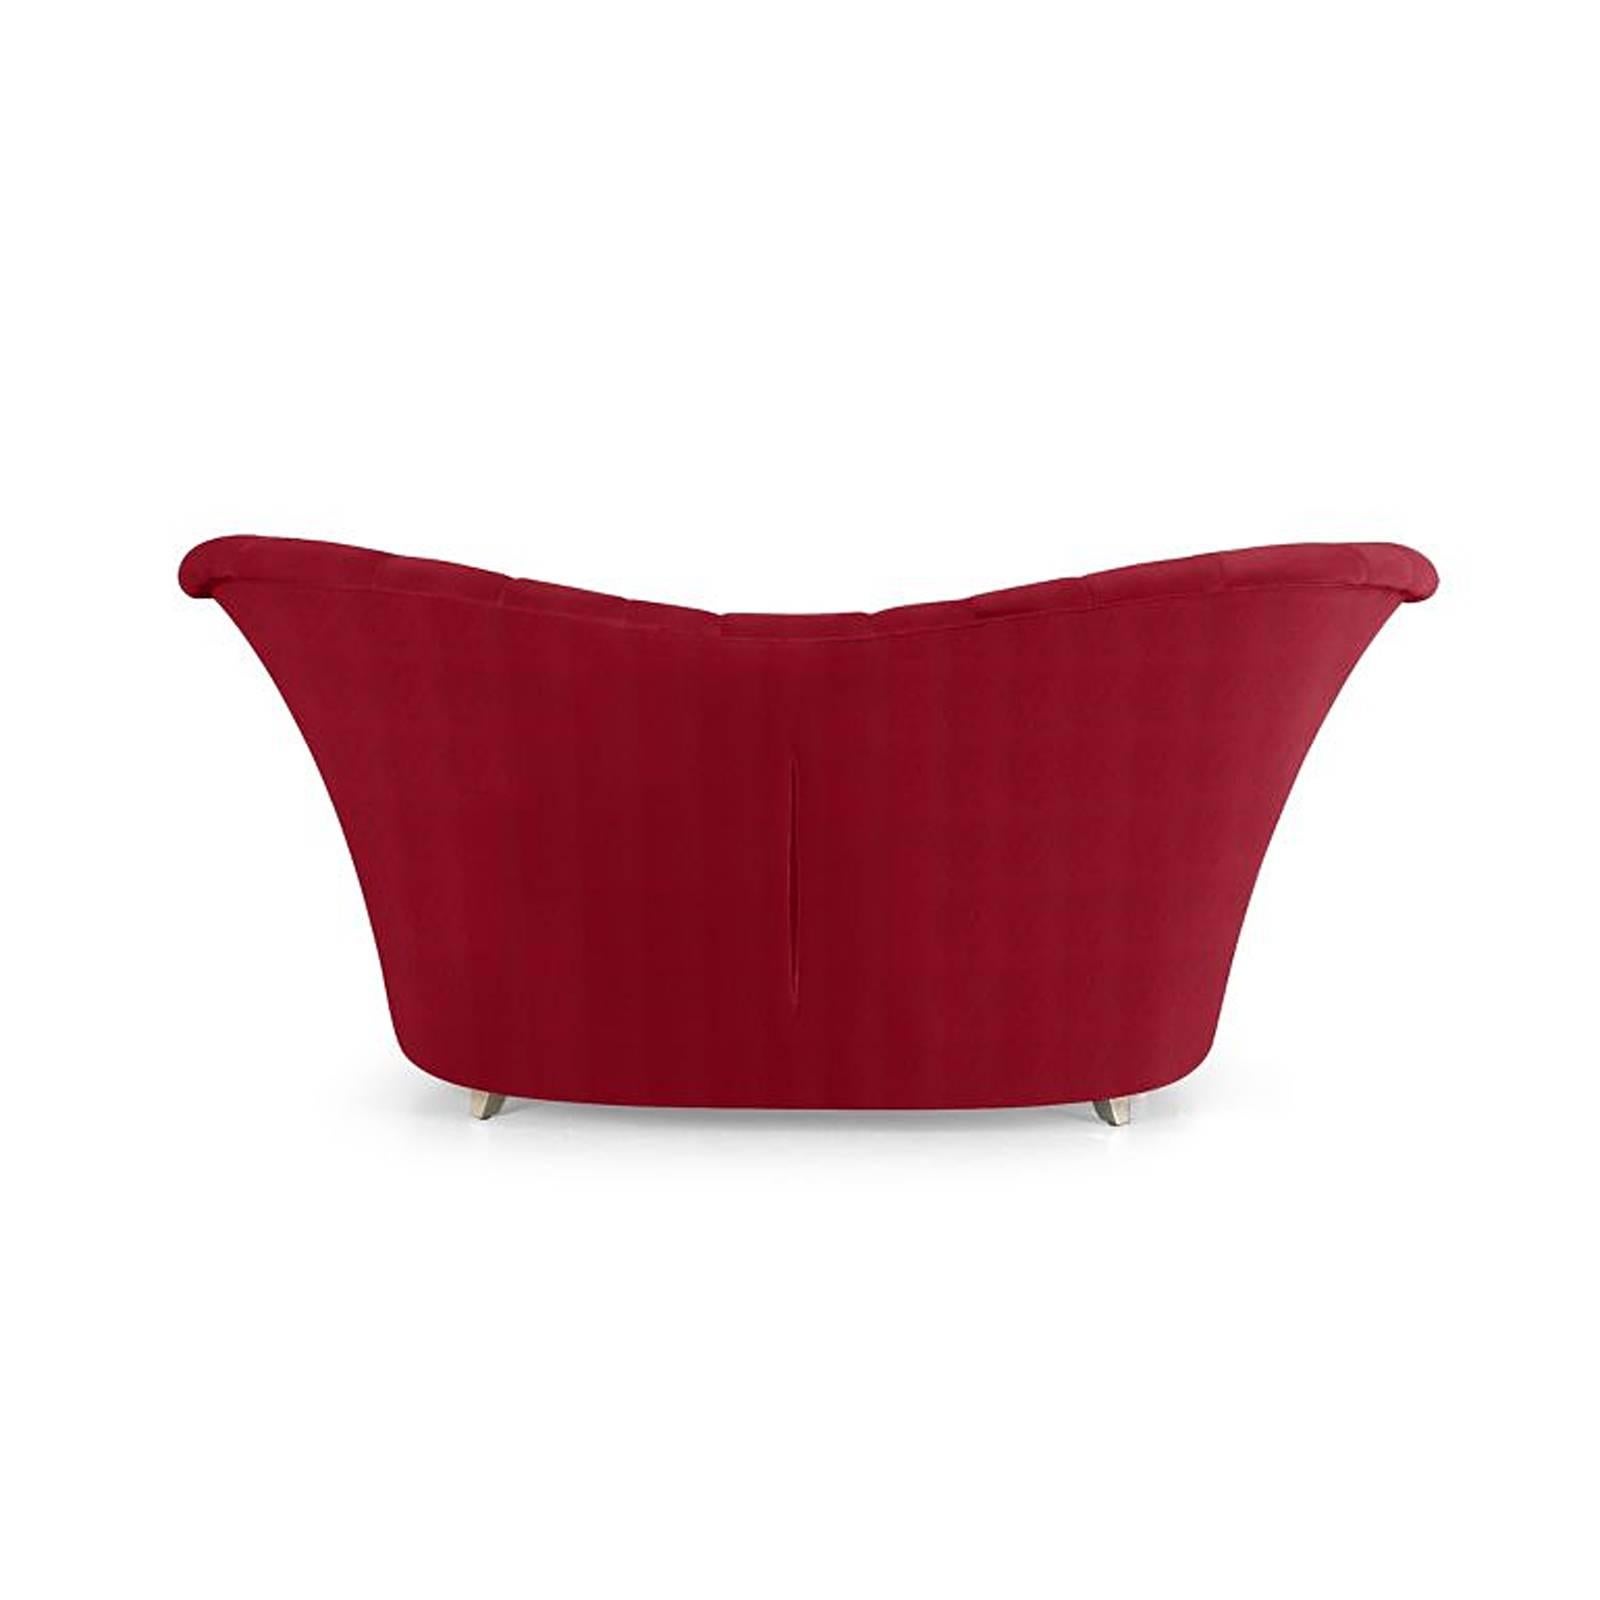 English Butterfly Sofa with Solid Mahogany Wood Structure and Red Velvet